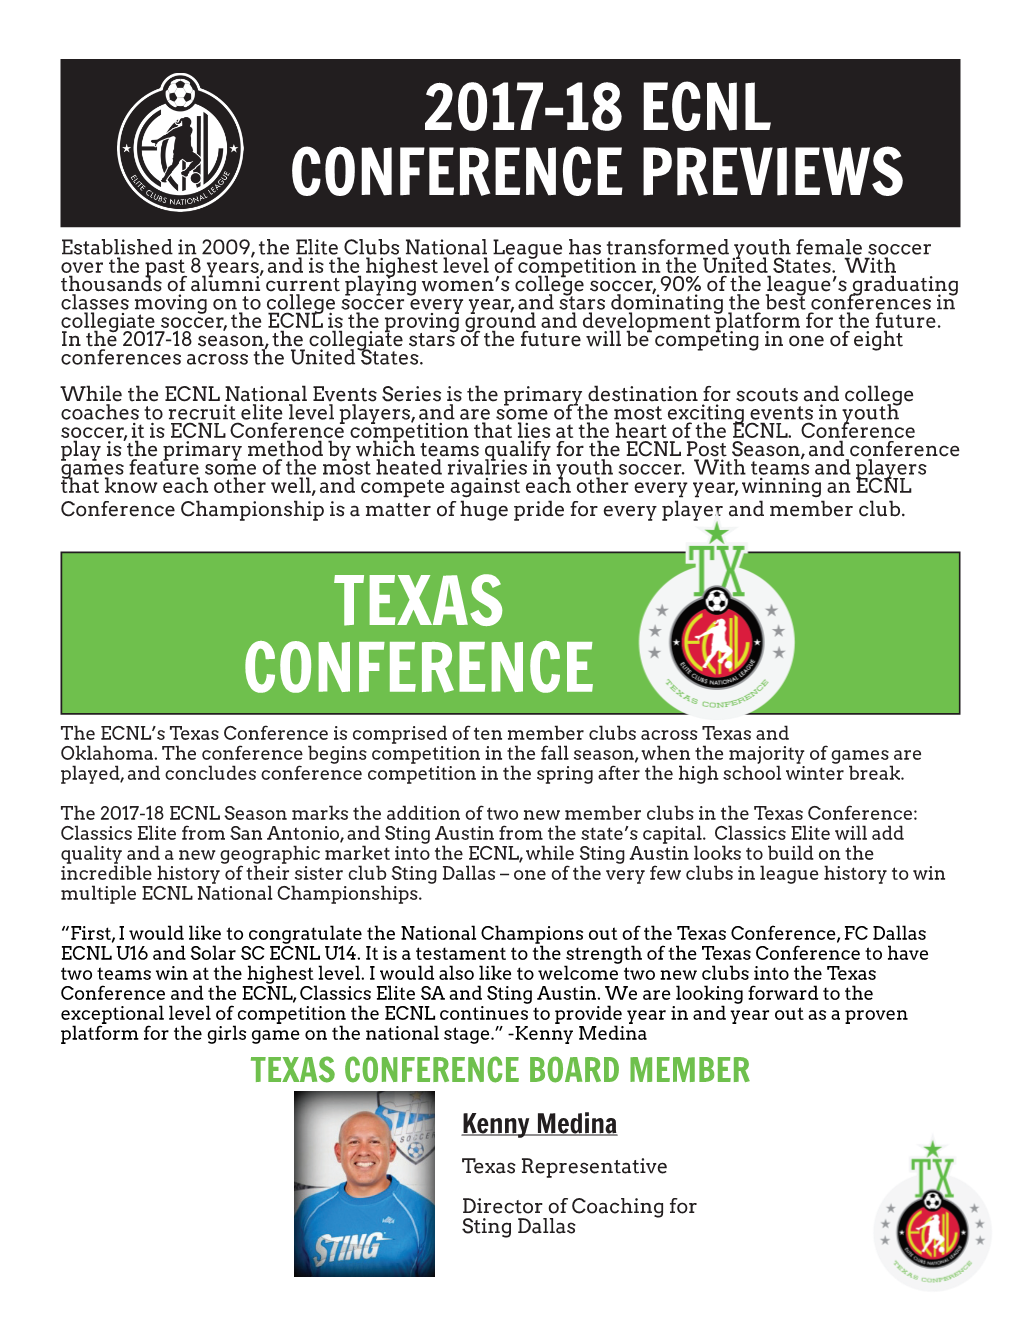 TEXAS CONFERENCE the ECNL’S Texas Conference Is Comprised of Ten Member Clubs Across Texas and Oklahoma